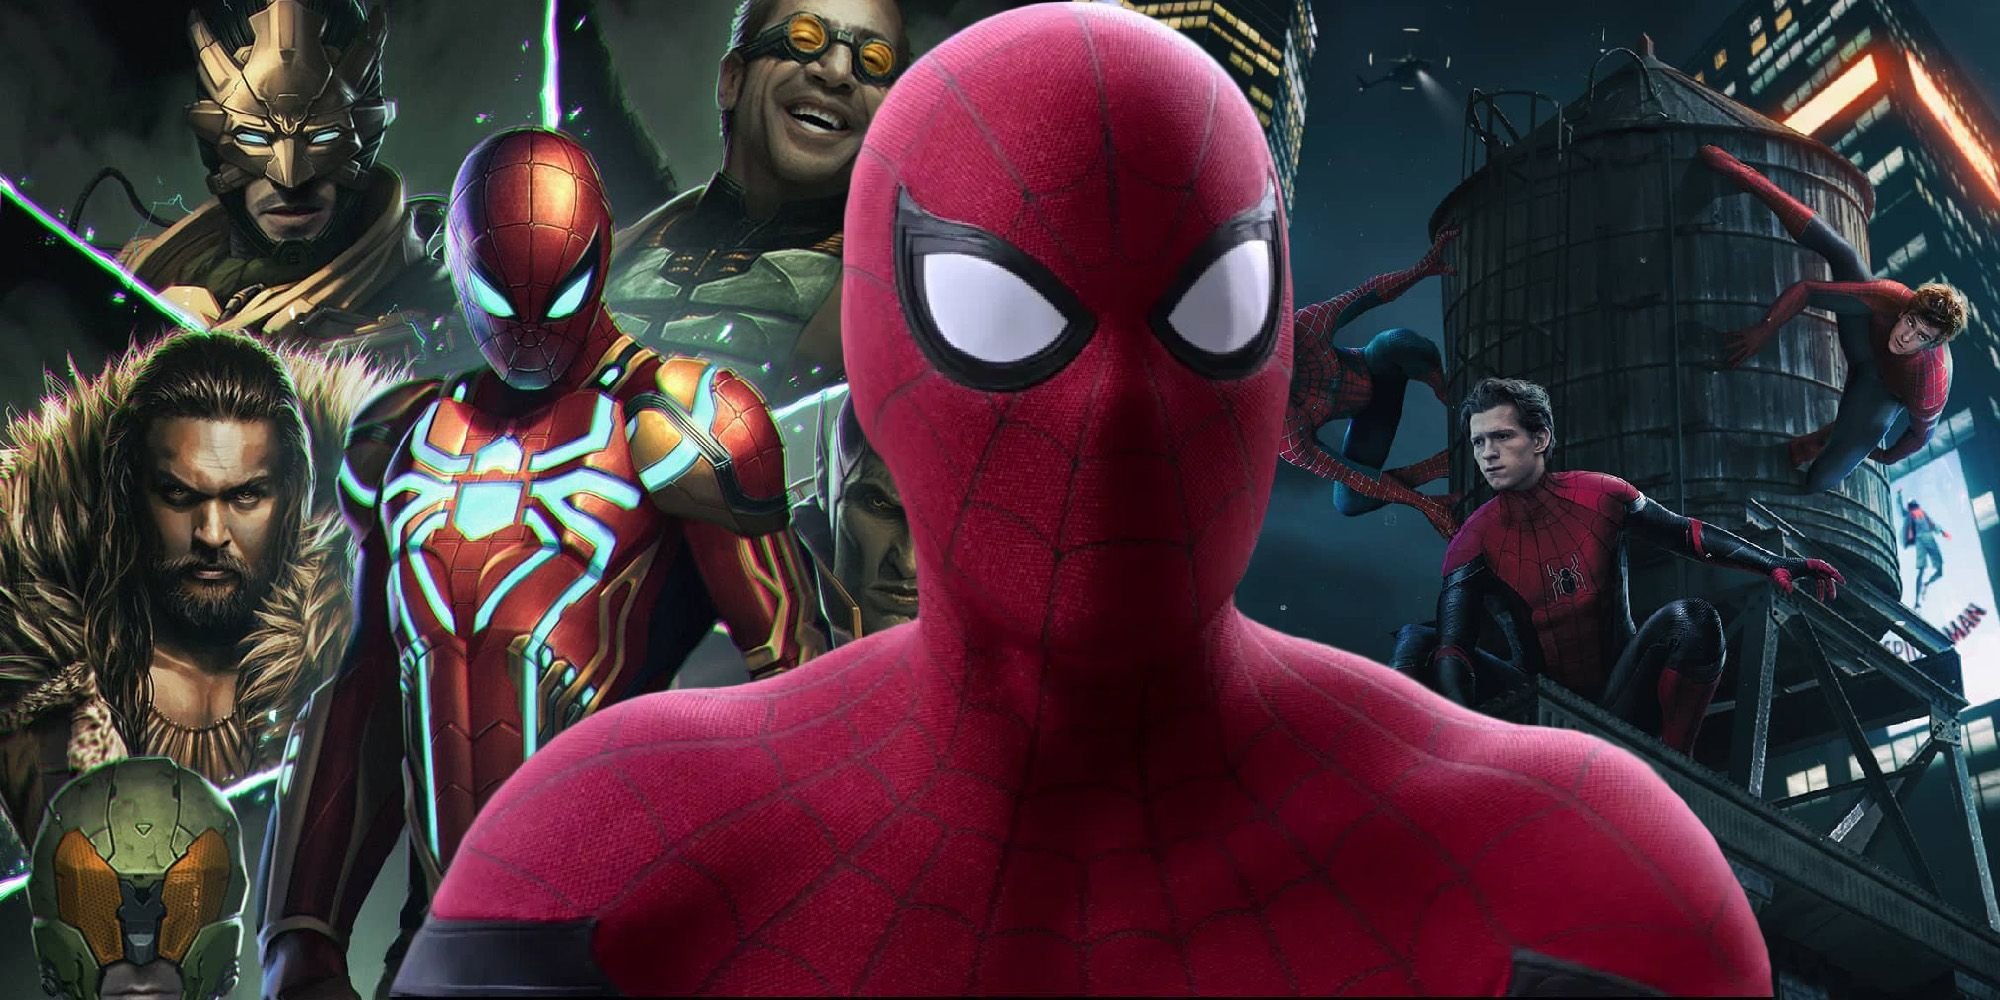 MCU Theory: Spider-Man 3 Is A Sinister Six Movie (Not Spider-Verse)